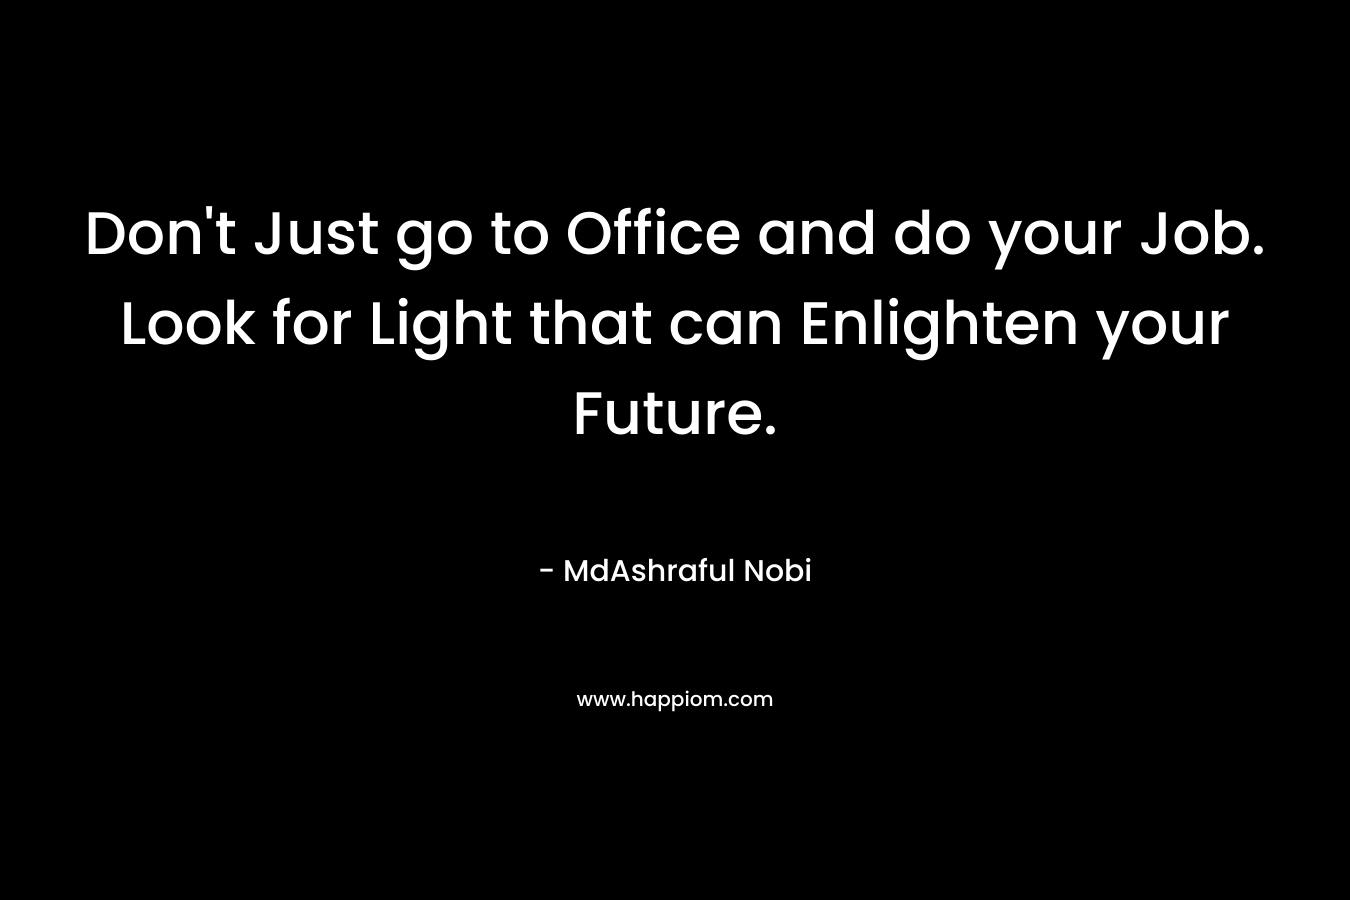 Don’t Just go to Office and do your Job. Look for Light that can Enlighten your Future. – MdAshraful Nobi